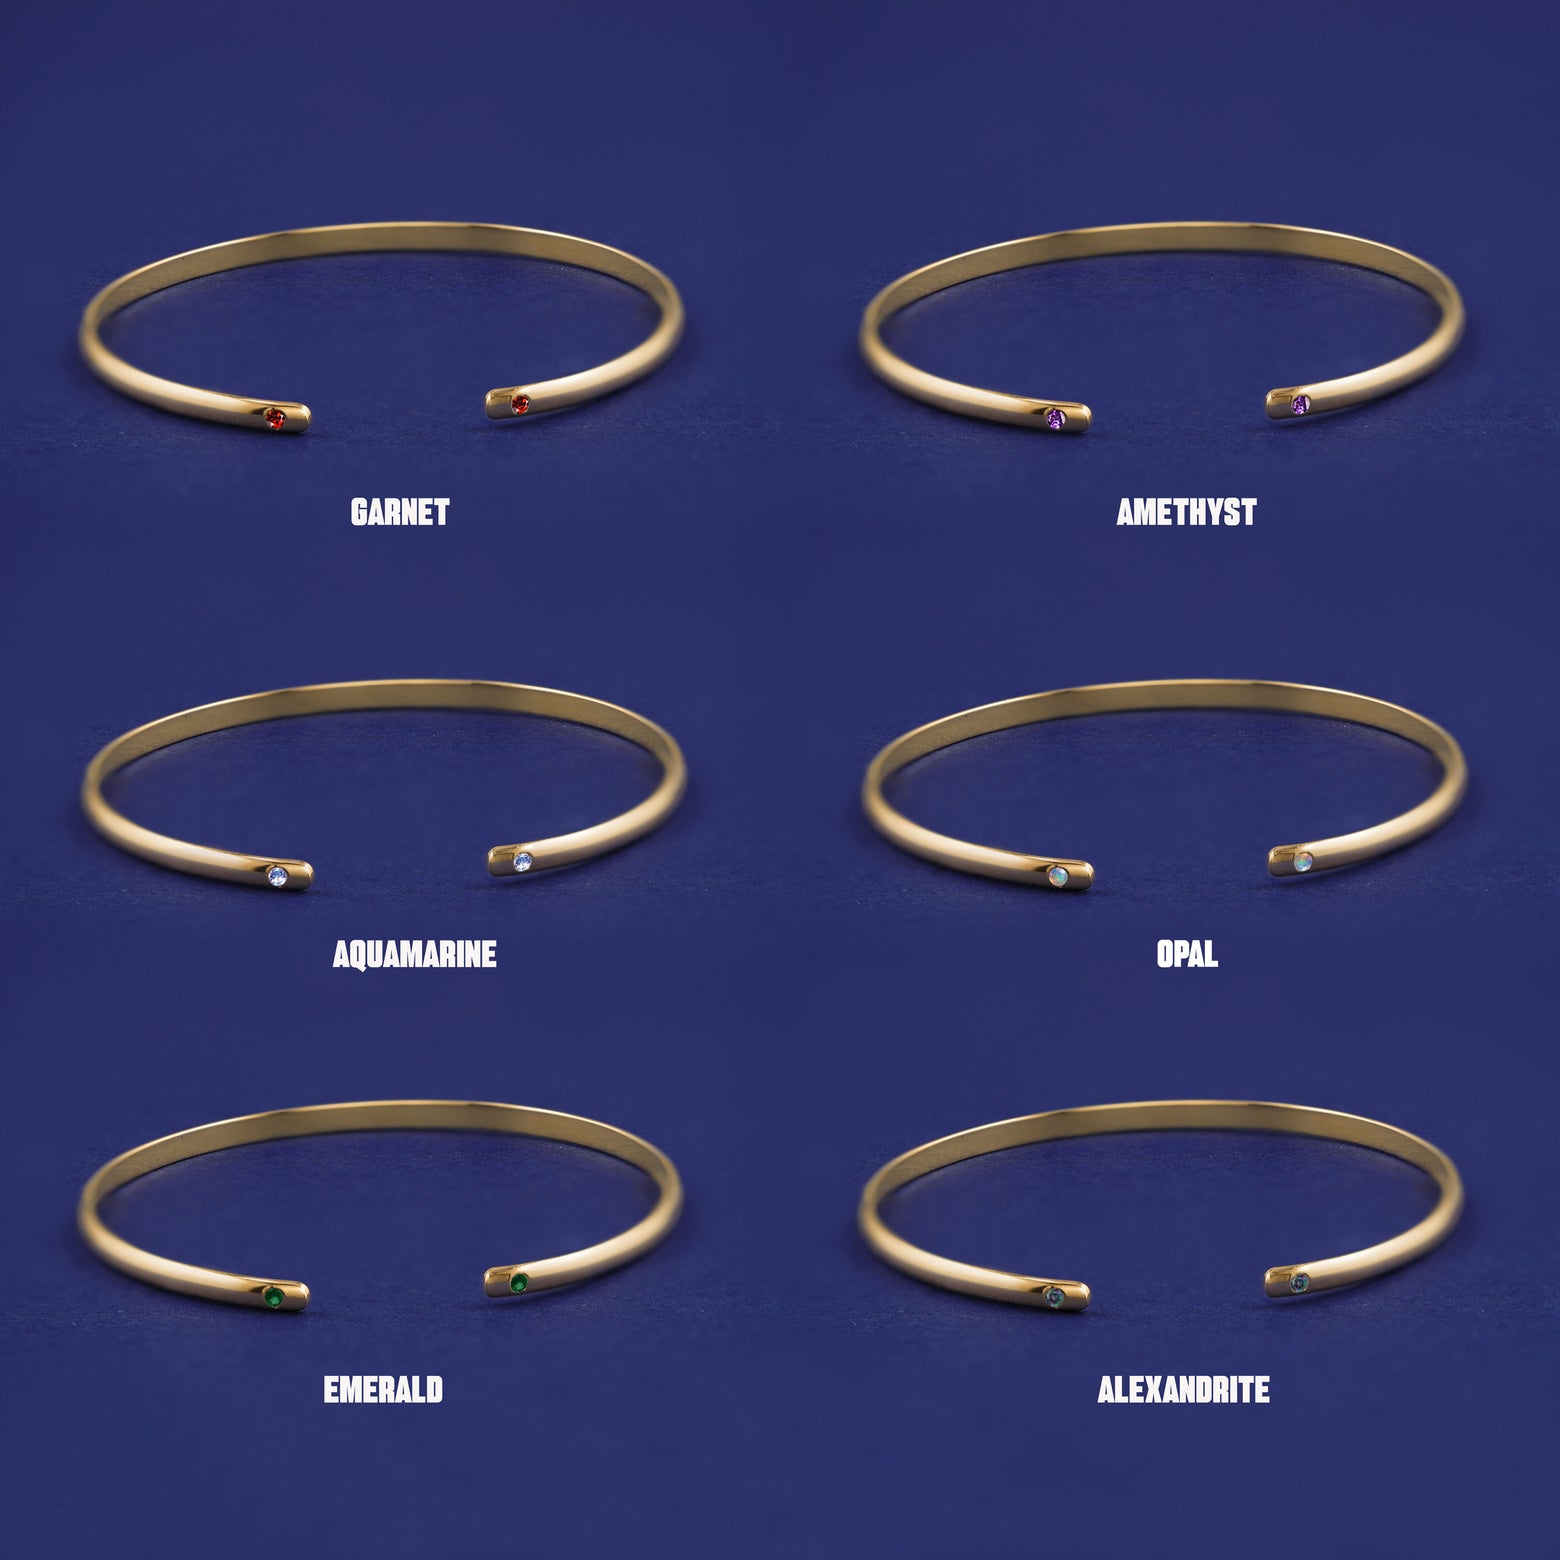 Six versions of the solid yellow gold Gemstone Open Bangle showing 6 different stone options